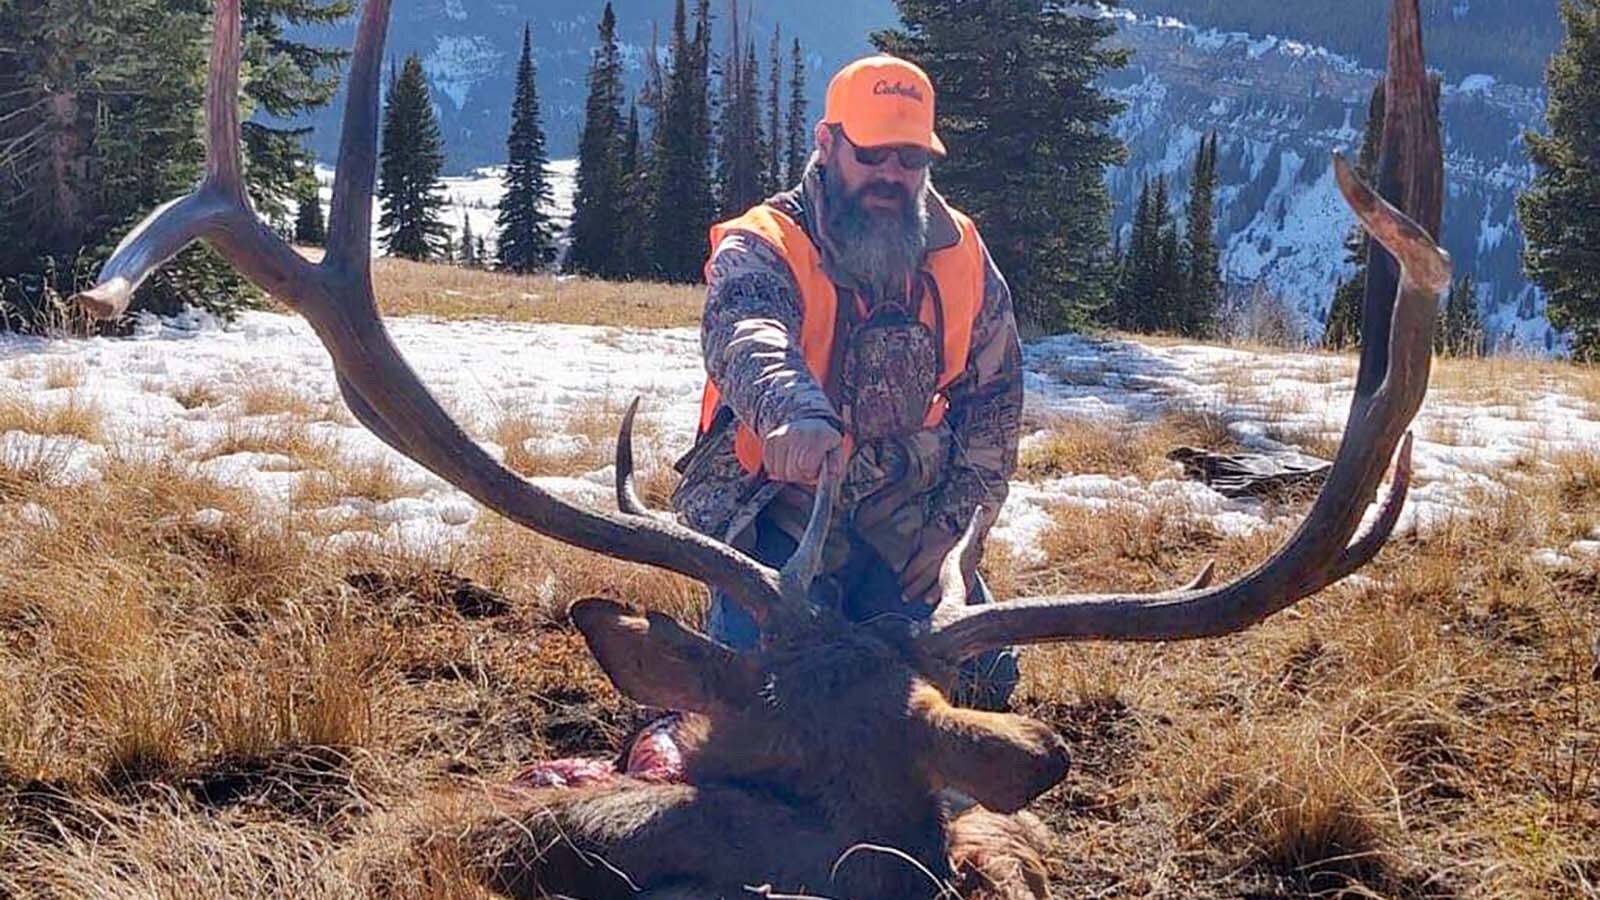 Northeast Wyoming resident Owen Miller is an avid hunter and hunting guide. He bagged this huge bull on an over-the-counter elk tag in Colorado in 2020. However, Colorado is discontinuing some elk tags for non-residents.